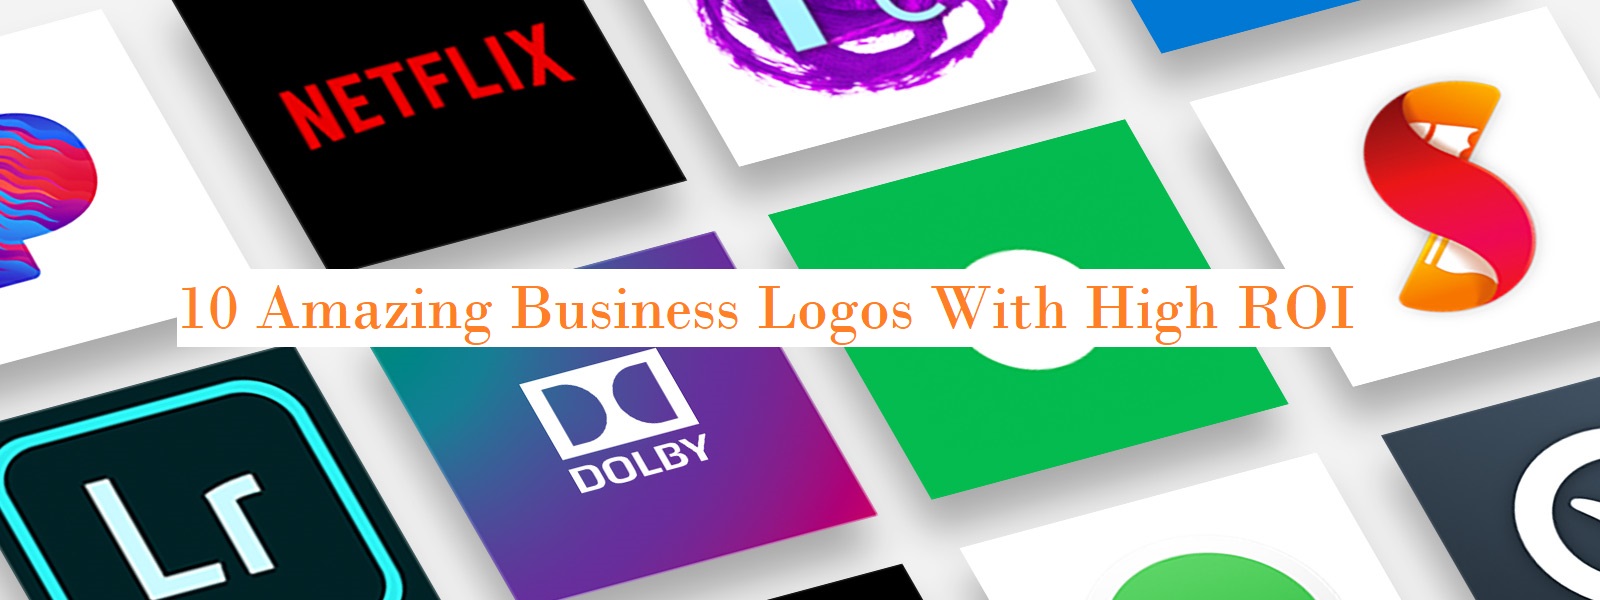 10 Amazing Business Logos With High ROI